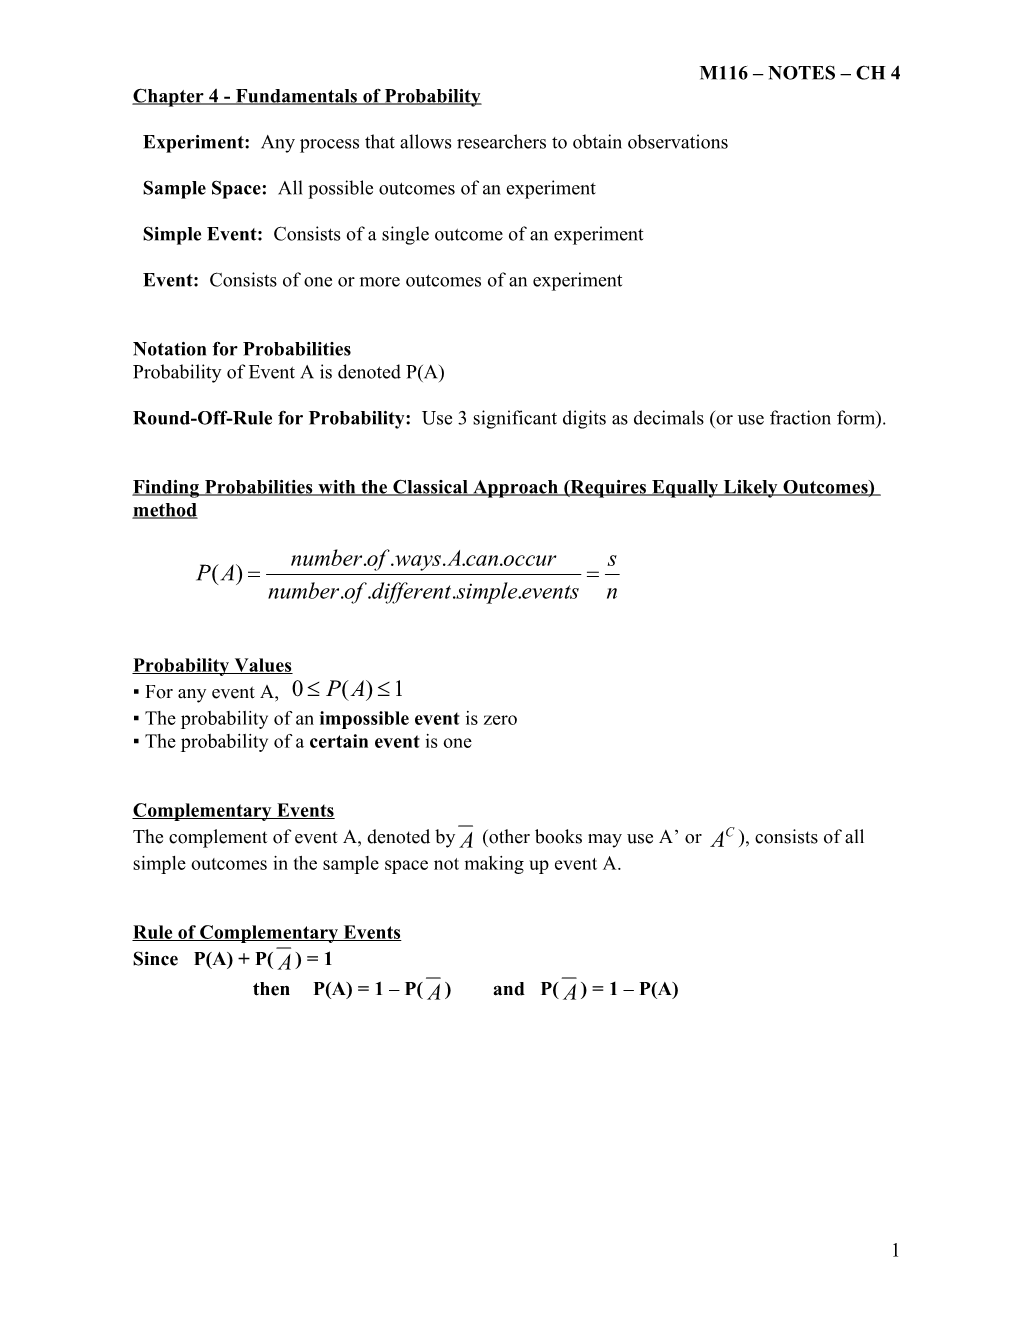 Chapter 4 - Fundamentals of Probability